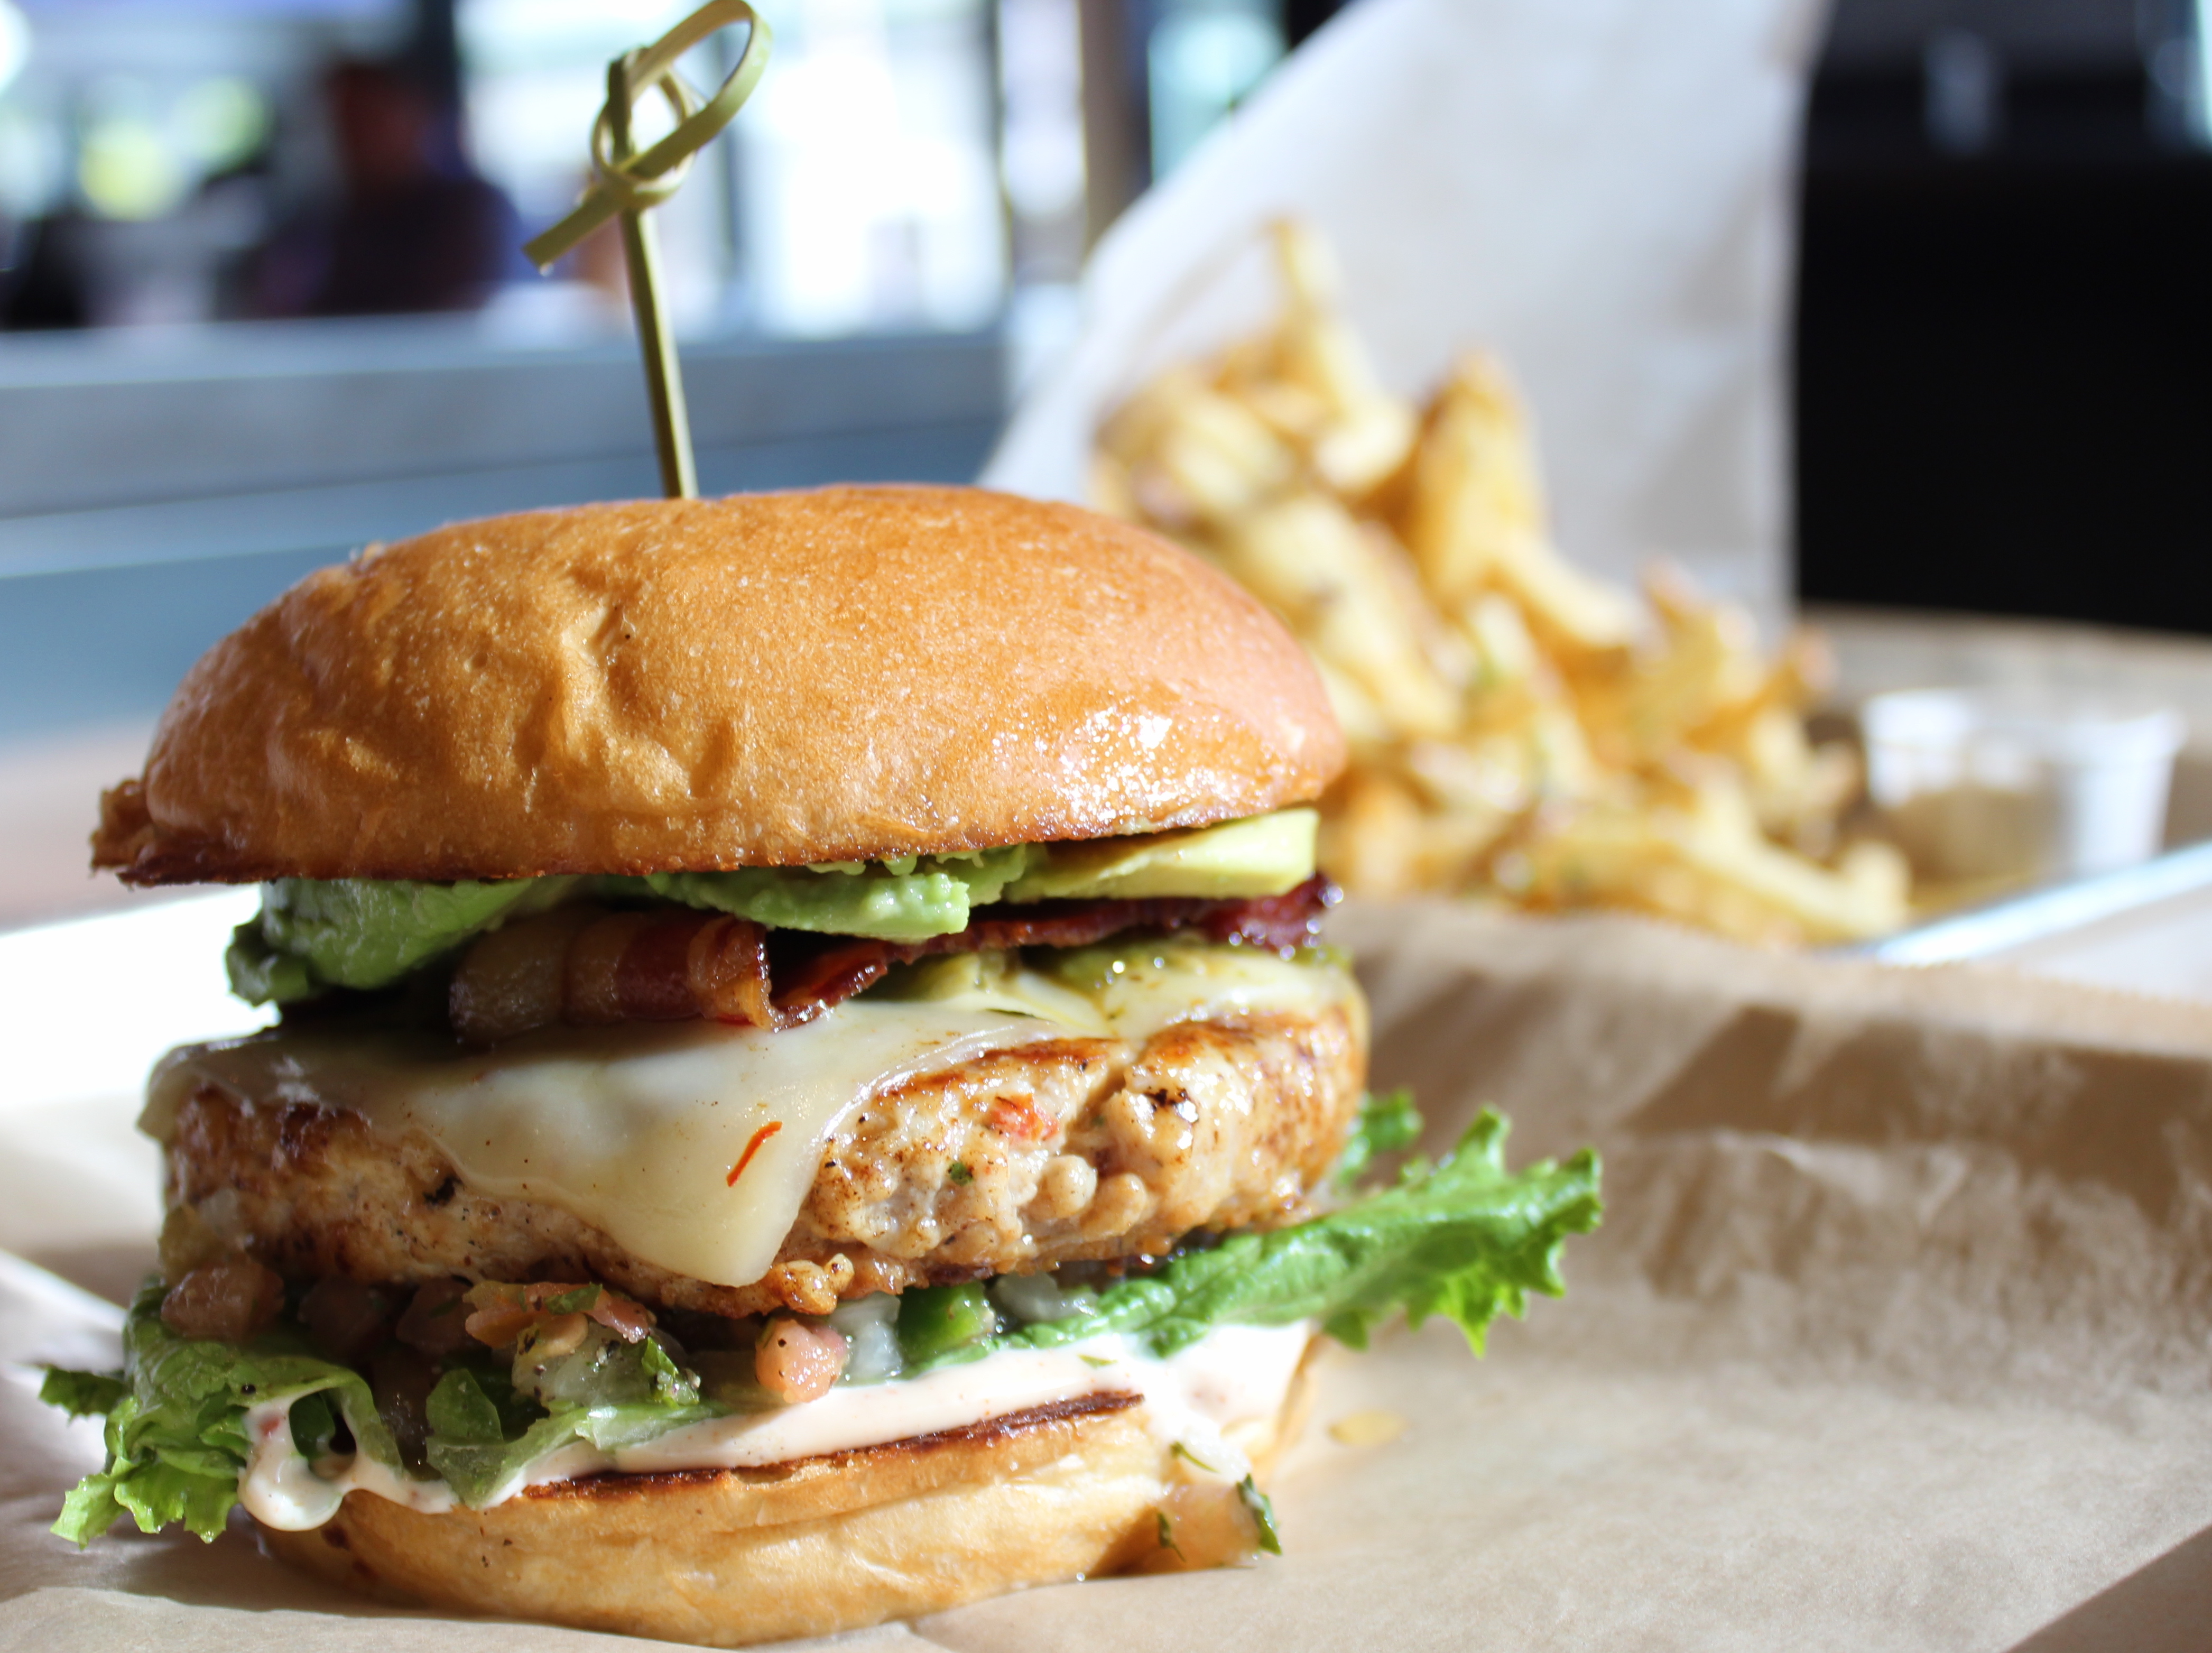 Hopdoddy Burger Bar: An Austin, TX-Based Concept Taking Over the West Coast  - Girls on Food